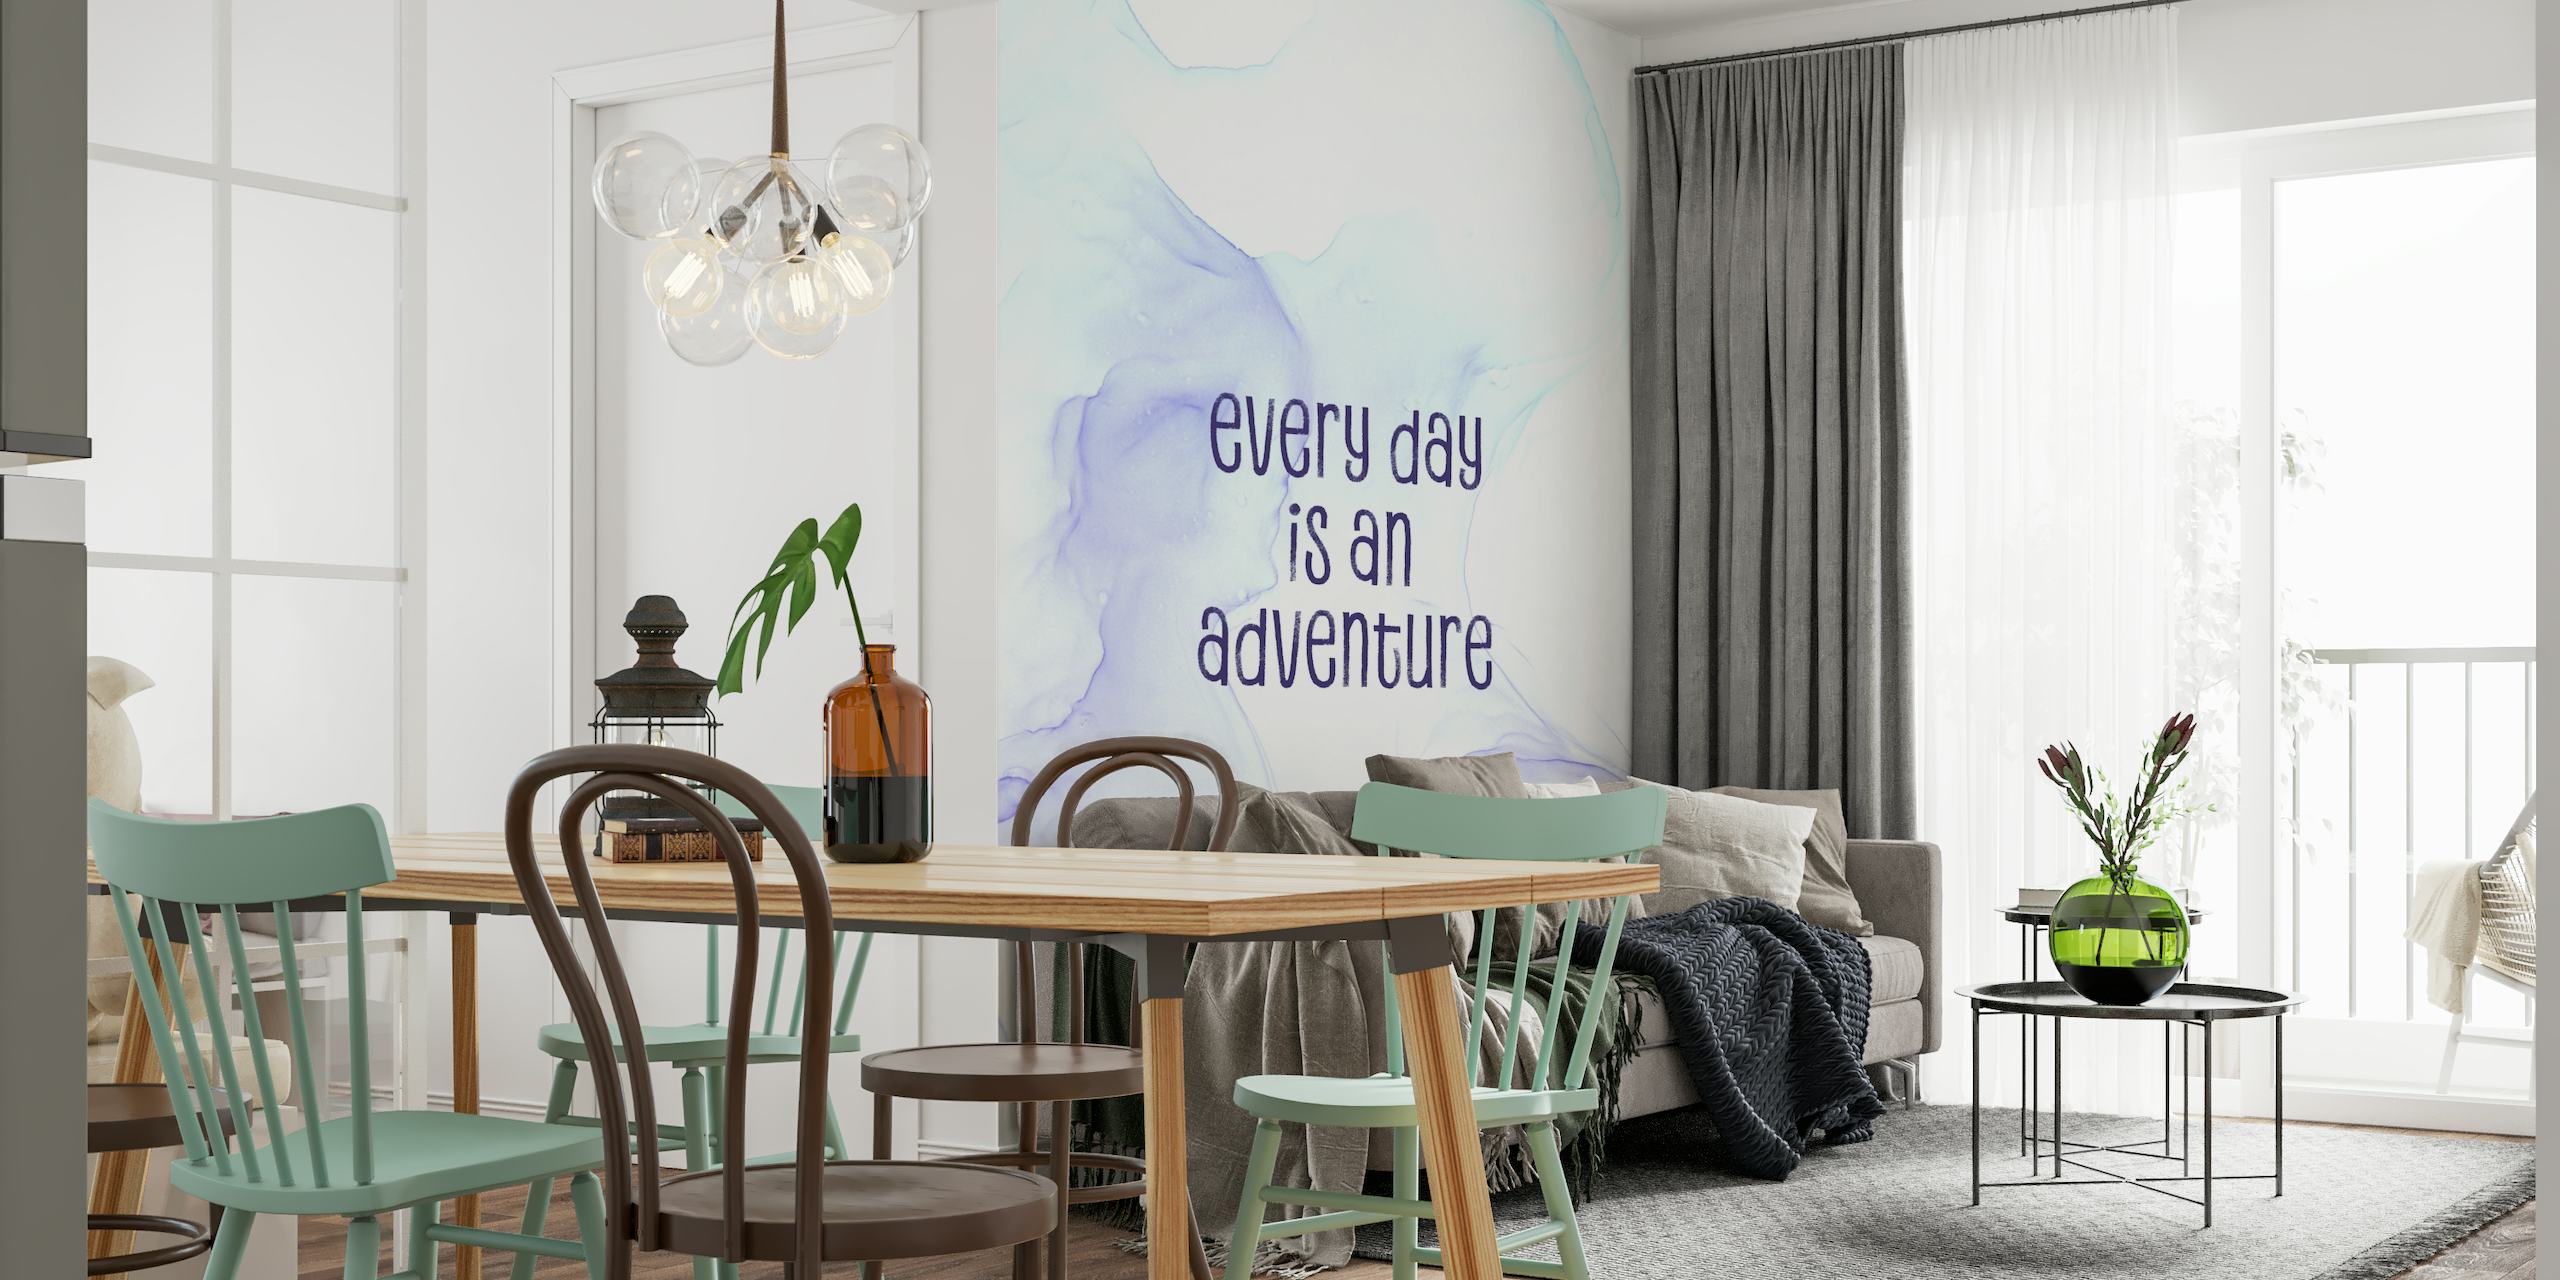 Every day is an adventure wallpaper